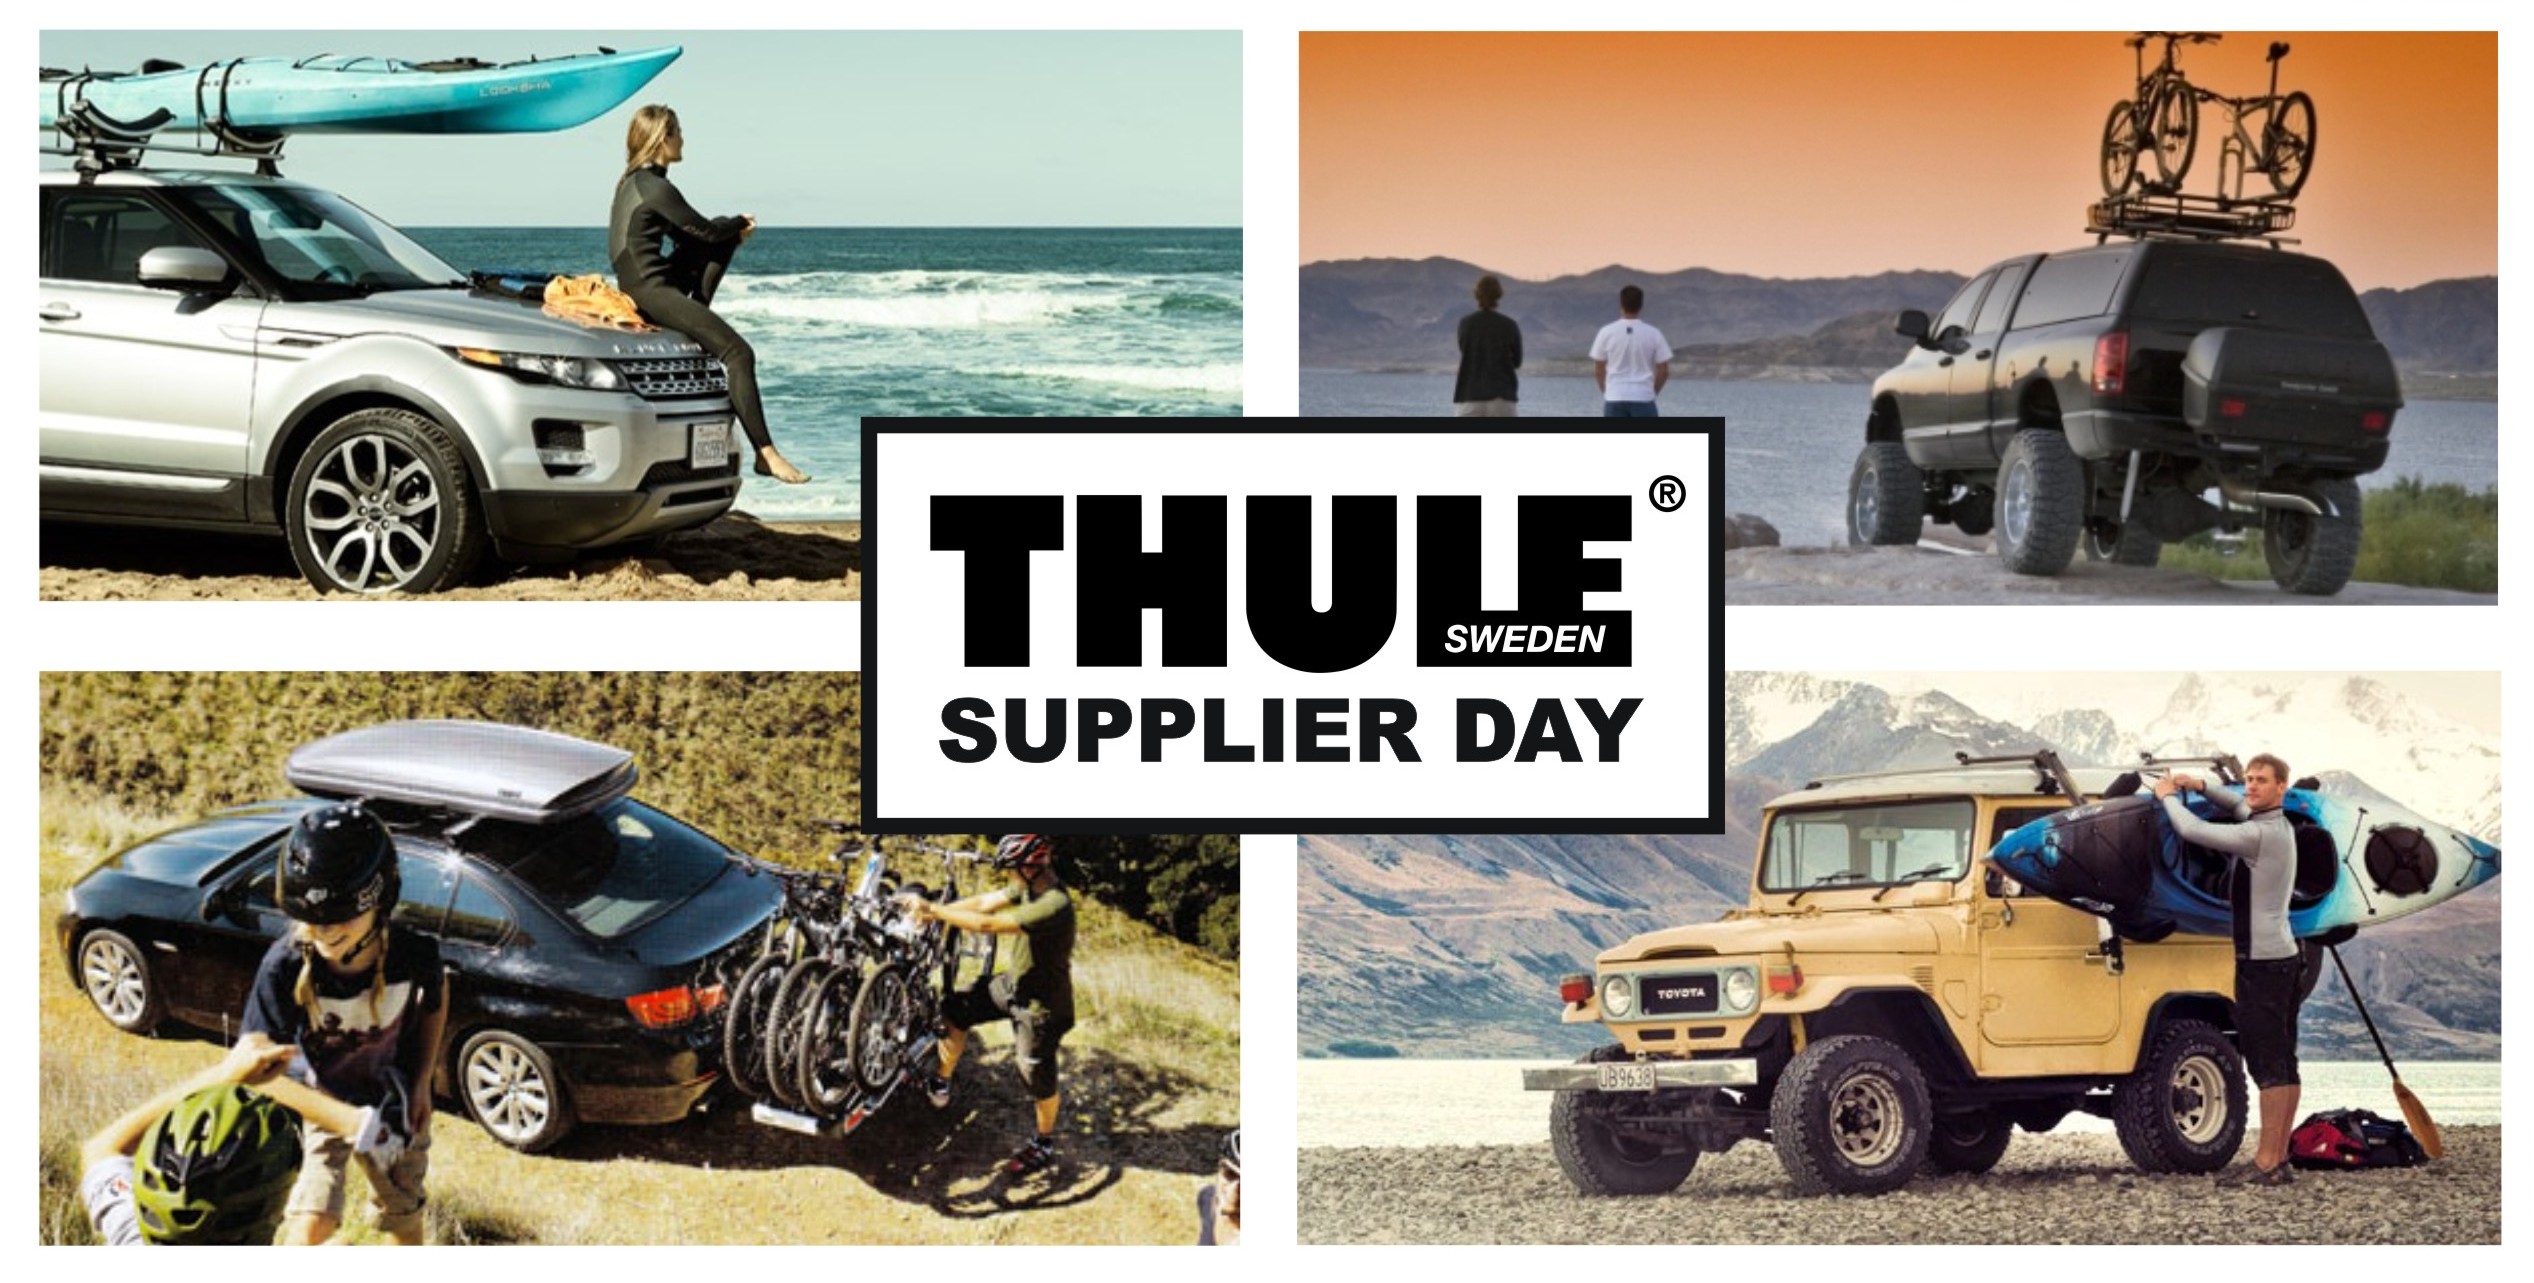 ”Supplier day” at Thule